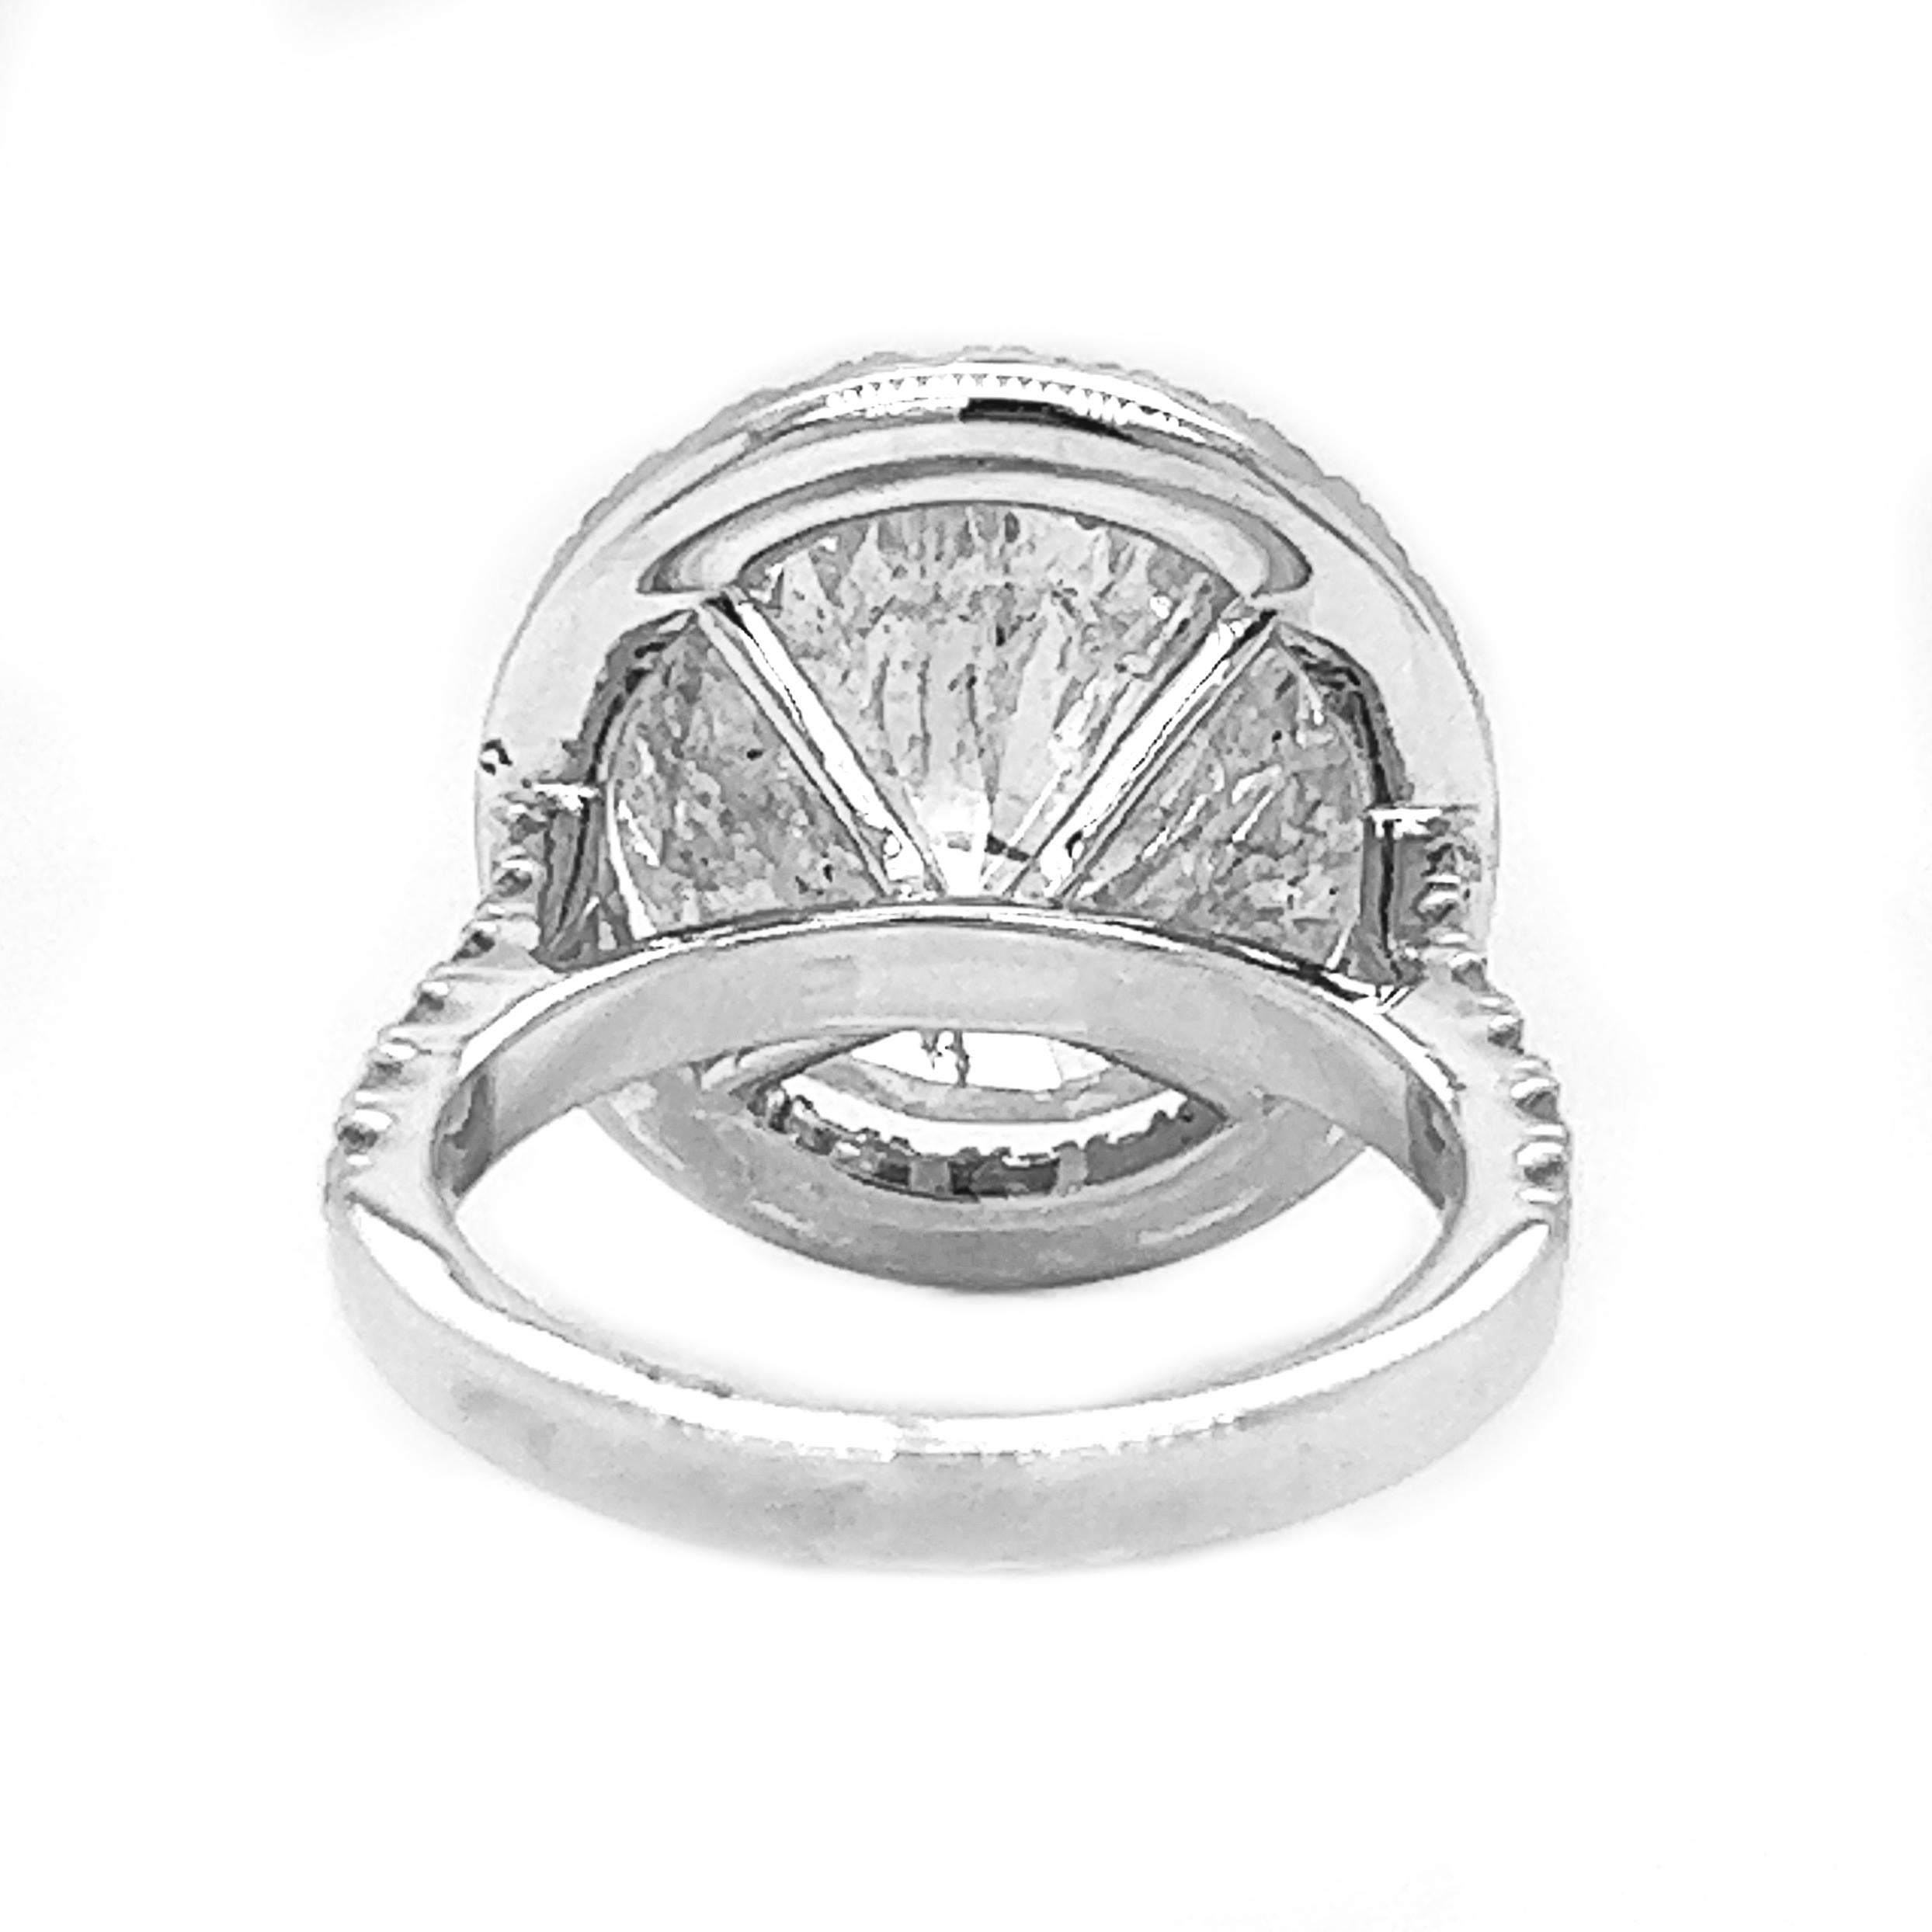 11 Carat Natural Mined Round Diamond Halo Bridal Anniversary Ring 14K White Gold In New Condition For Sale In Los Angeles, CA